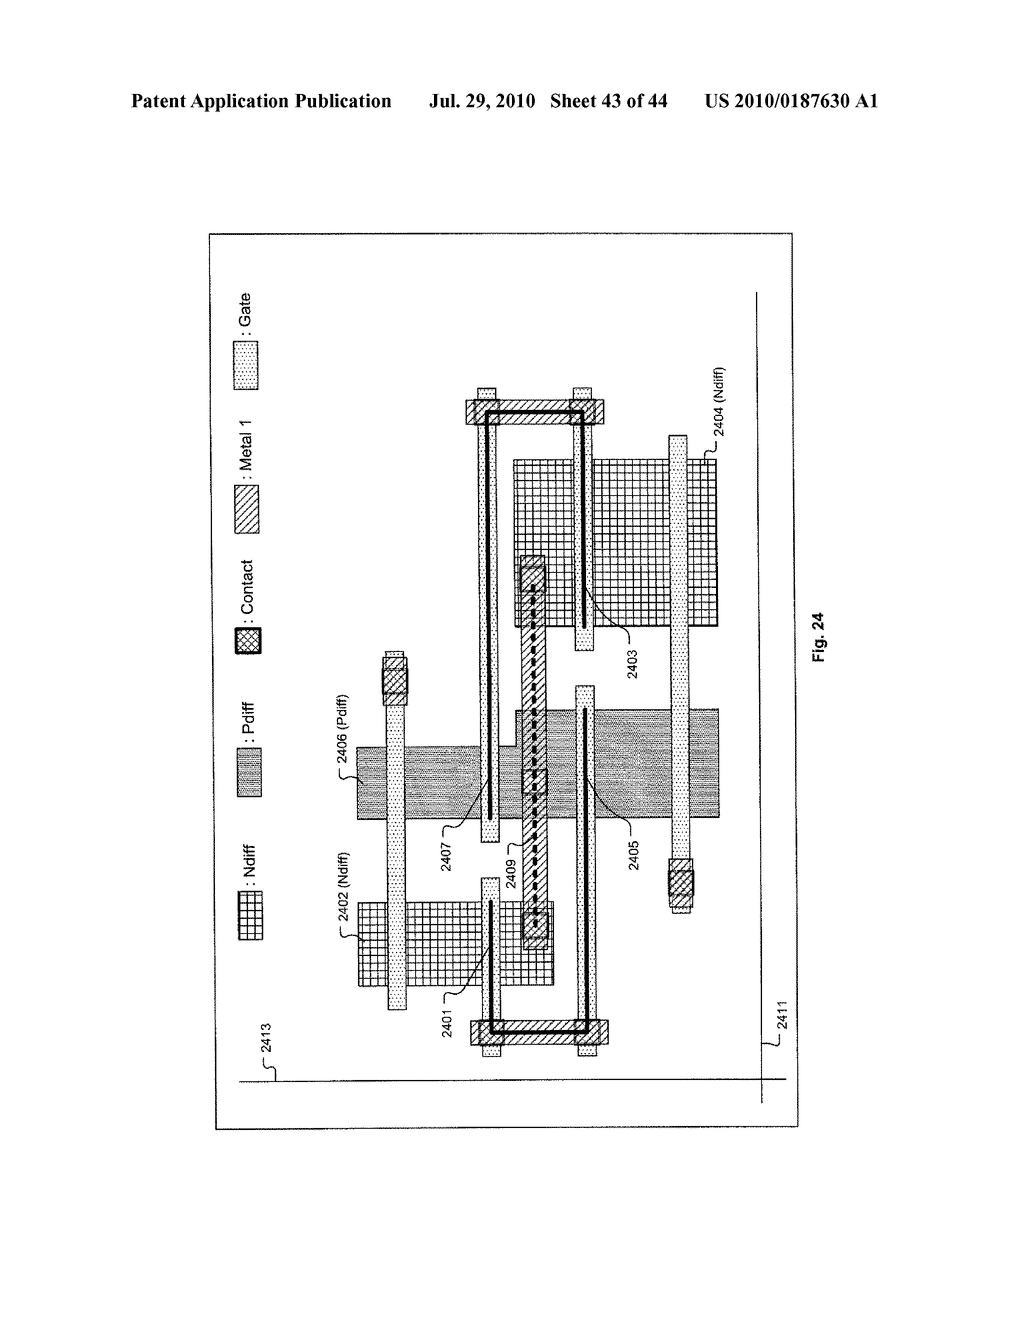 Channelized Gate Level Cross-Coupled Transistor Device with Connection Between Cross-Coupled Transistor Gate Electrodes Made Utilizing Interconnect Level Other than Gate Electrode Level - diagram, schematic, and image 44